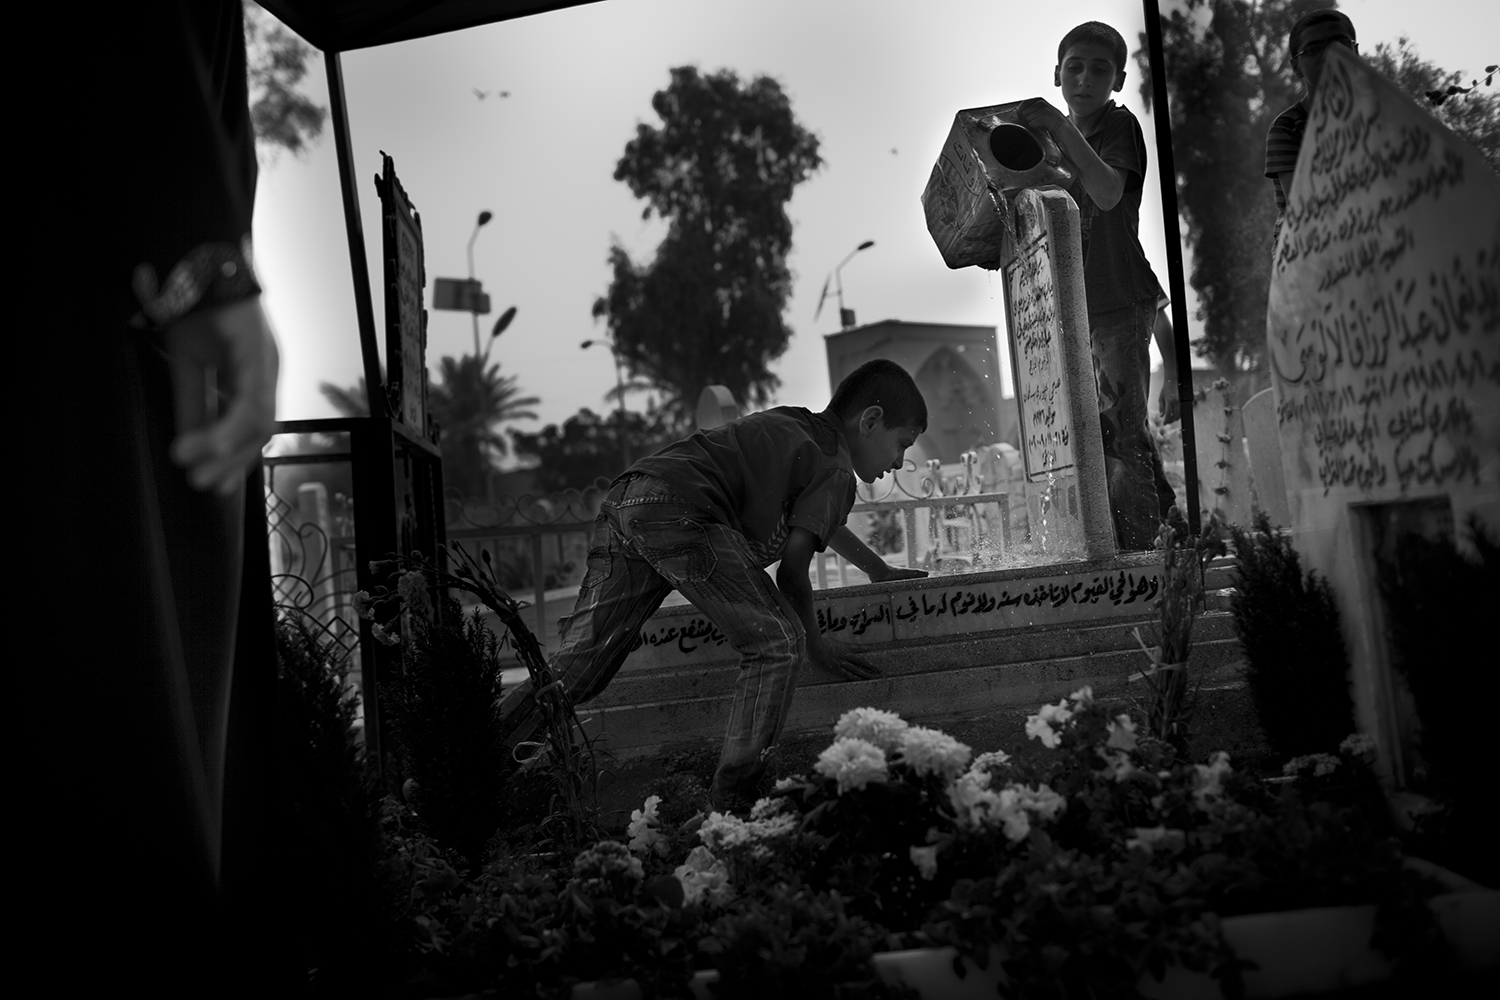 Apr. 18, 2012. Baghdad. Three children clean a grave with water from a battered canister at a cemetery.